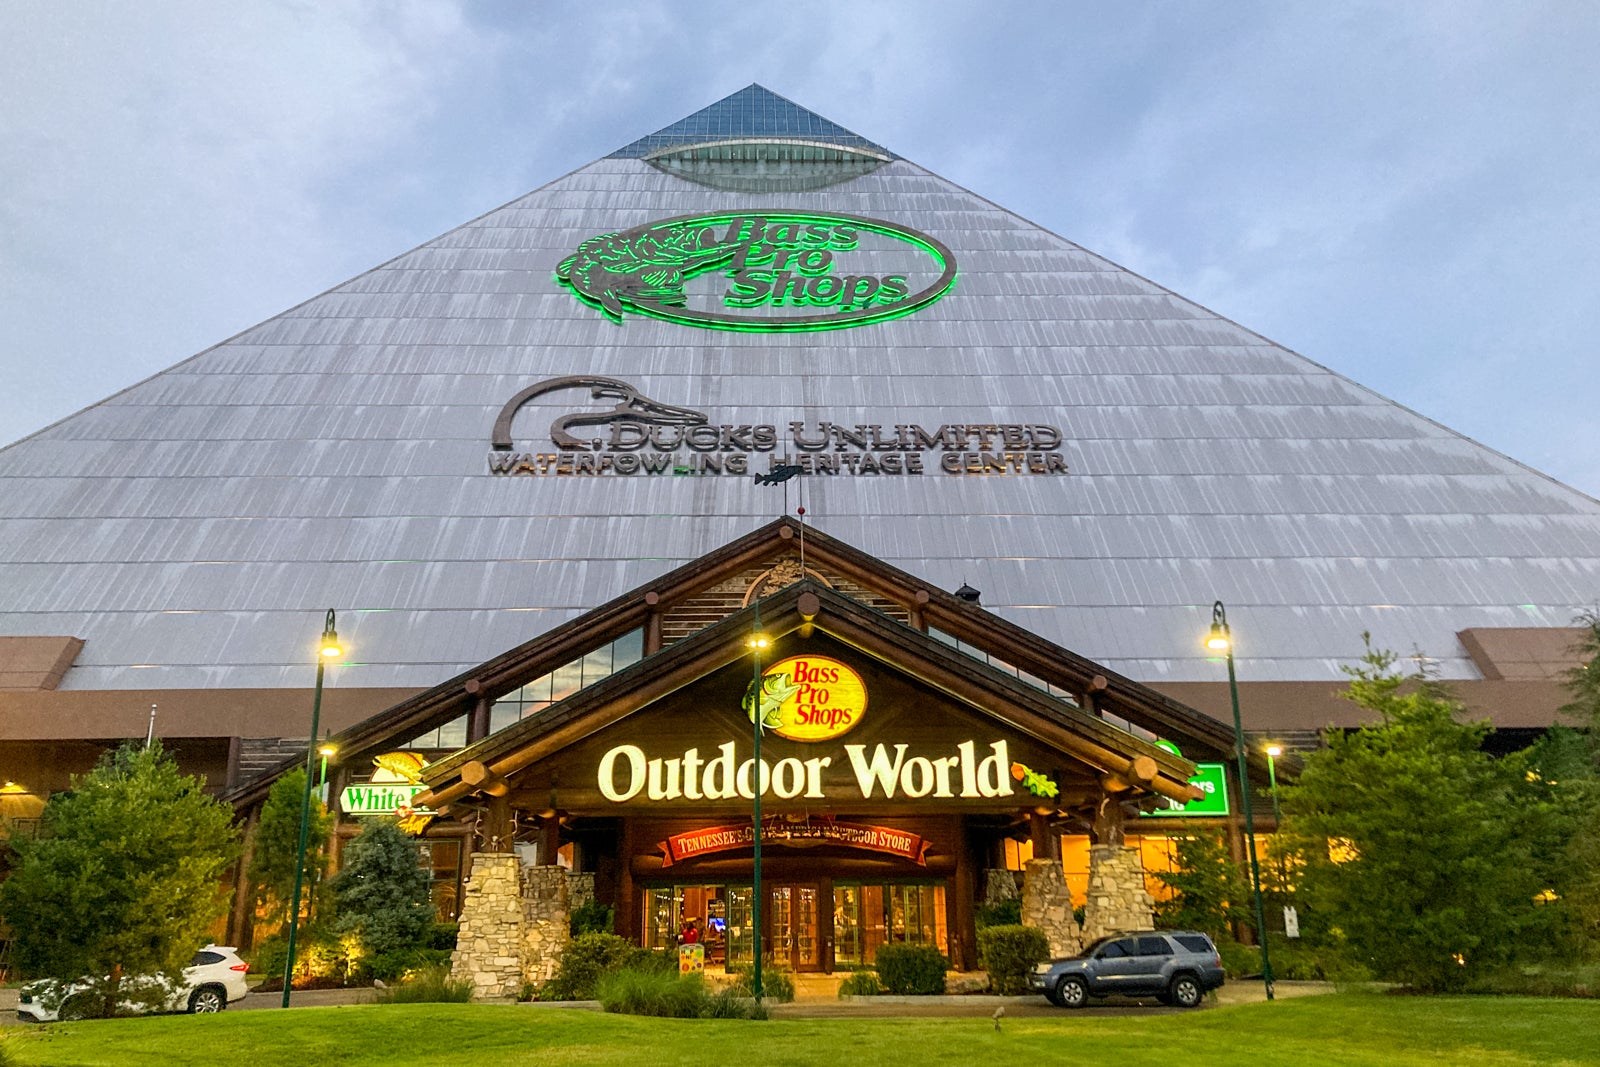 The world's 10th-tallest pyramid is a Bass Pro Shops megastore 